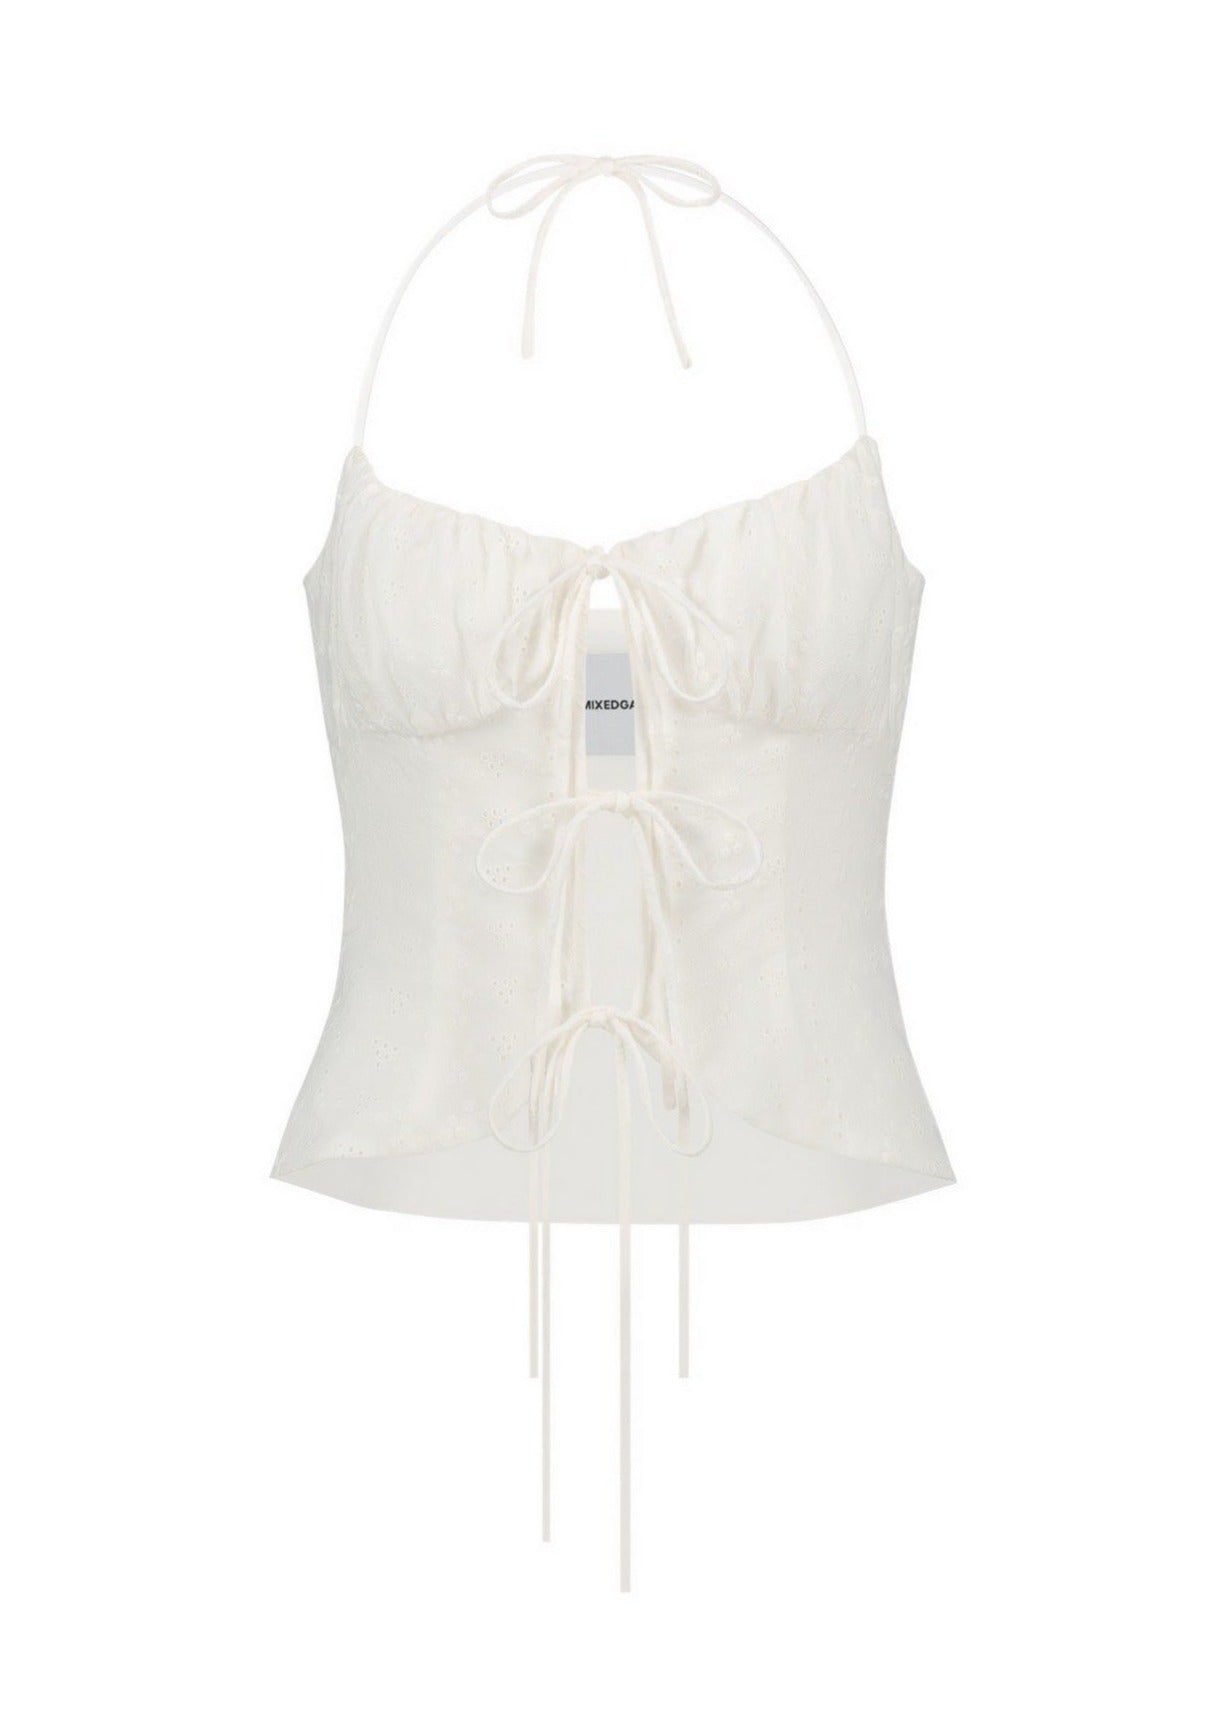 Bustier camisole top in white from the brand mixed gals